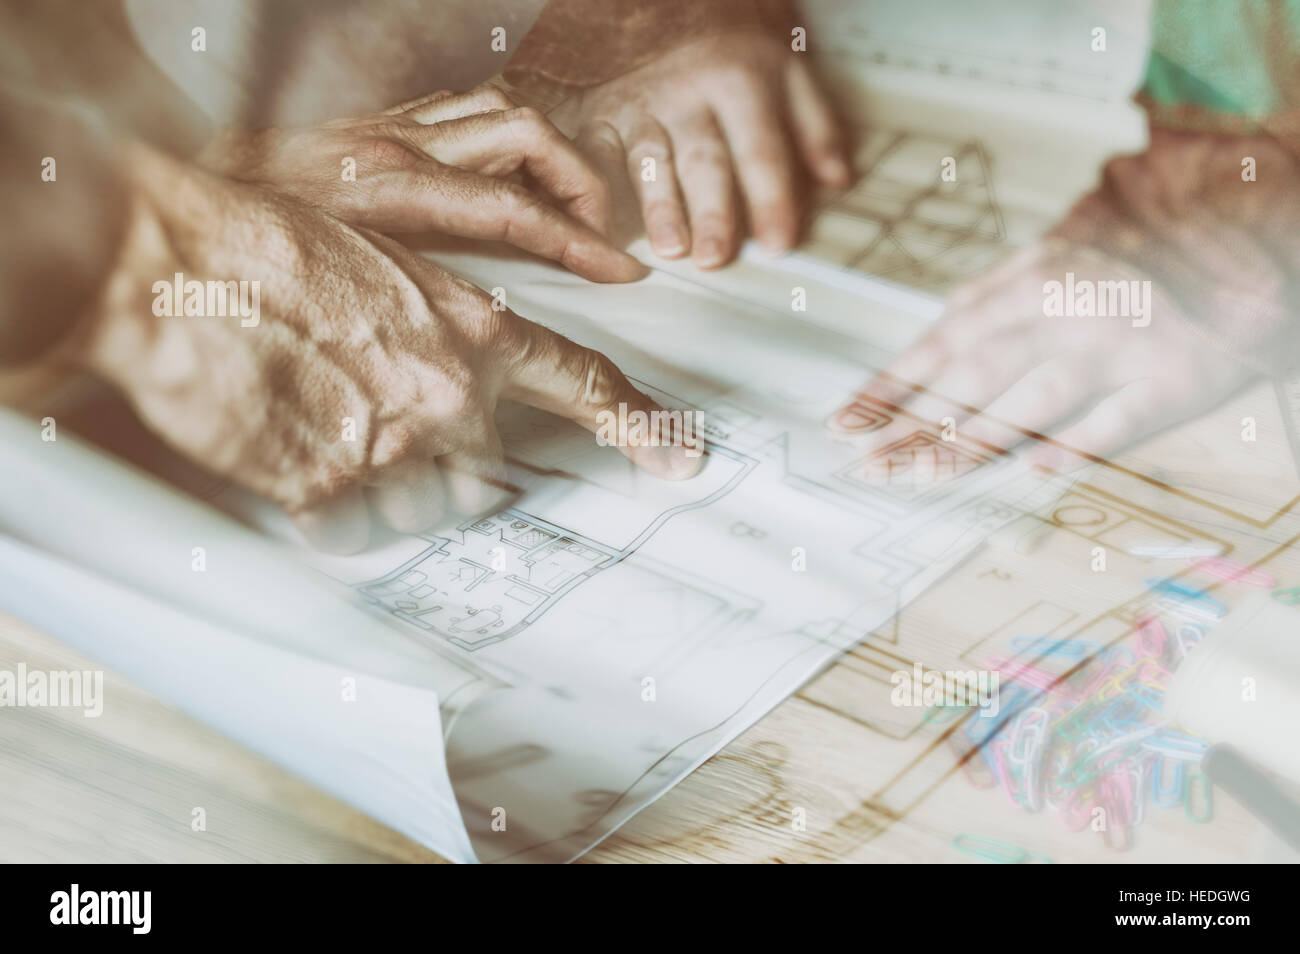 Hands of engineer working on architectural project. Construction concept. Double exposure of construction side and blueprint. Stock Photo